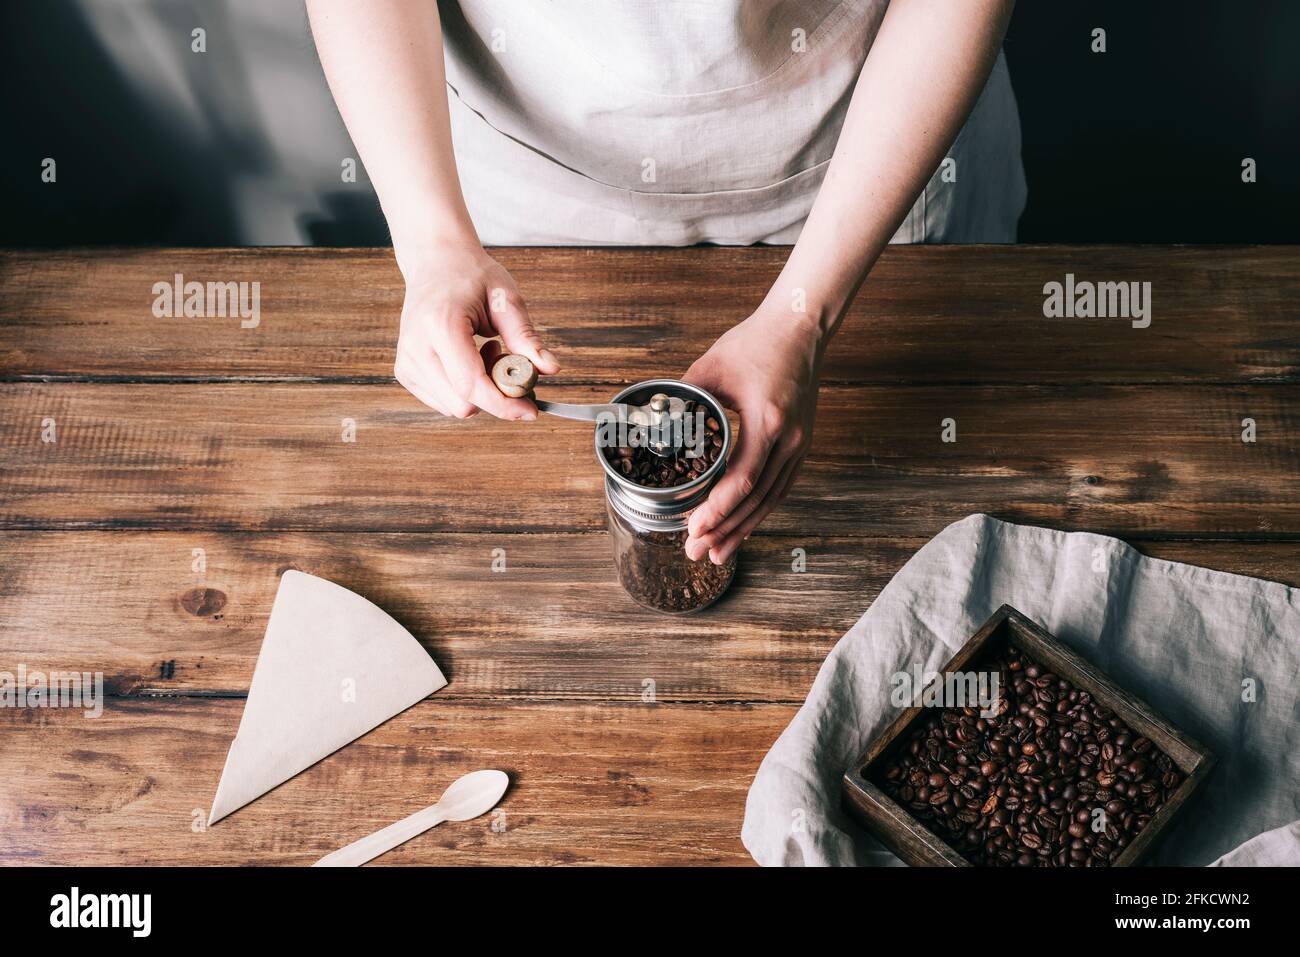 Grinding coffee in a metal and glass coffee grinder on a wooden table Stock Photo